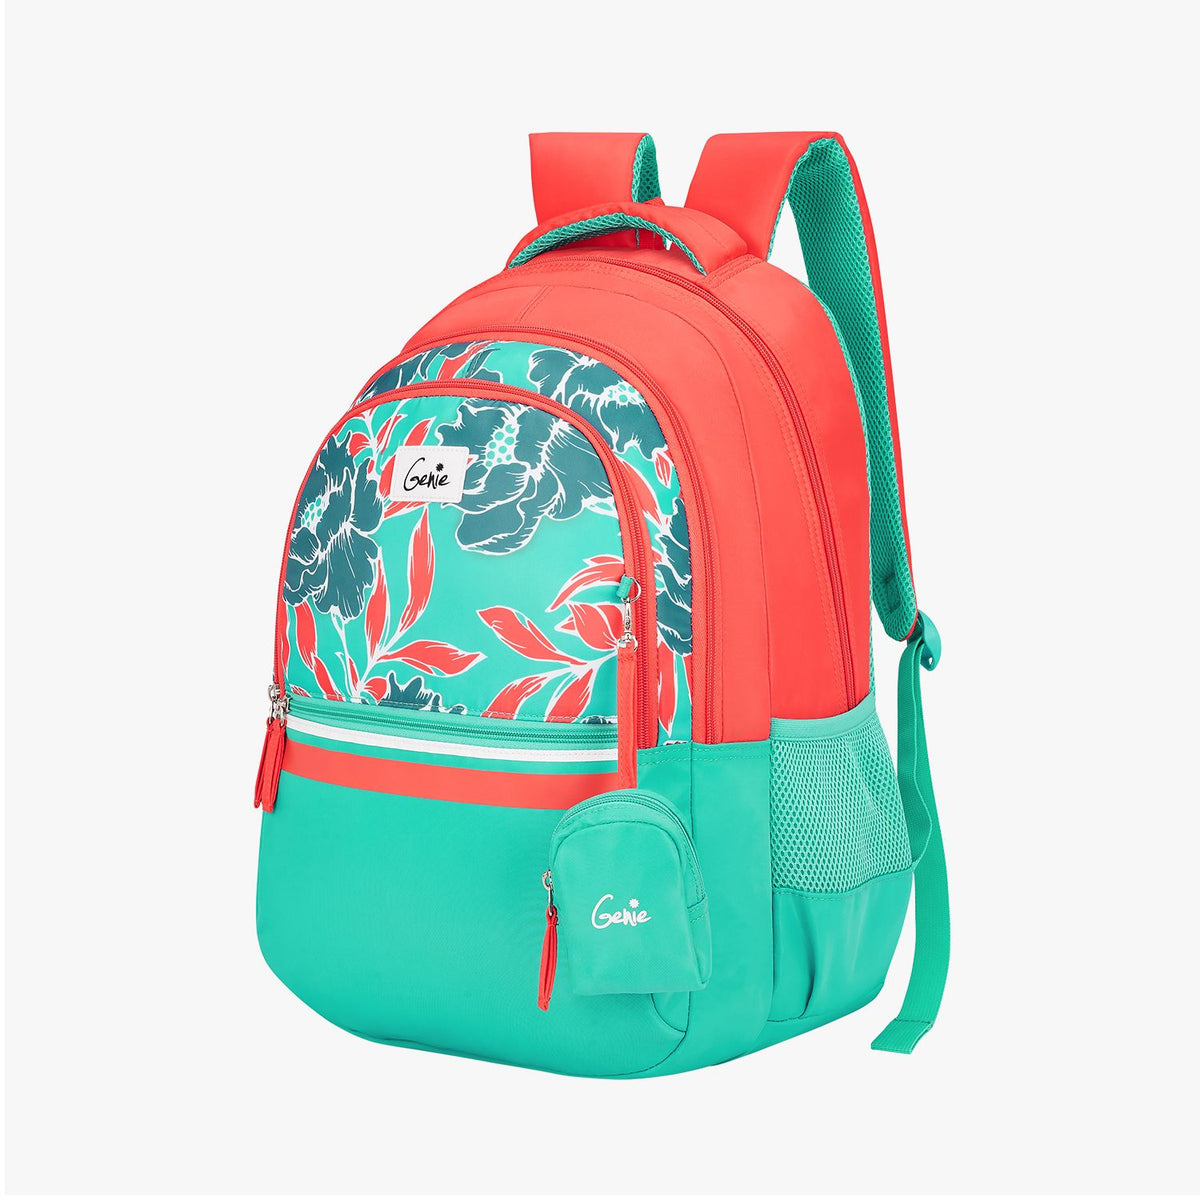 Zoey Laptop Backpack - Coral